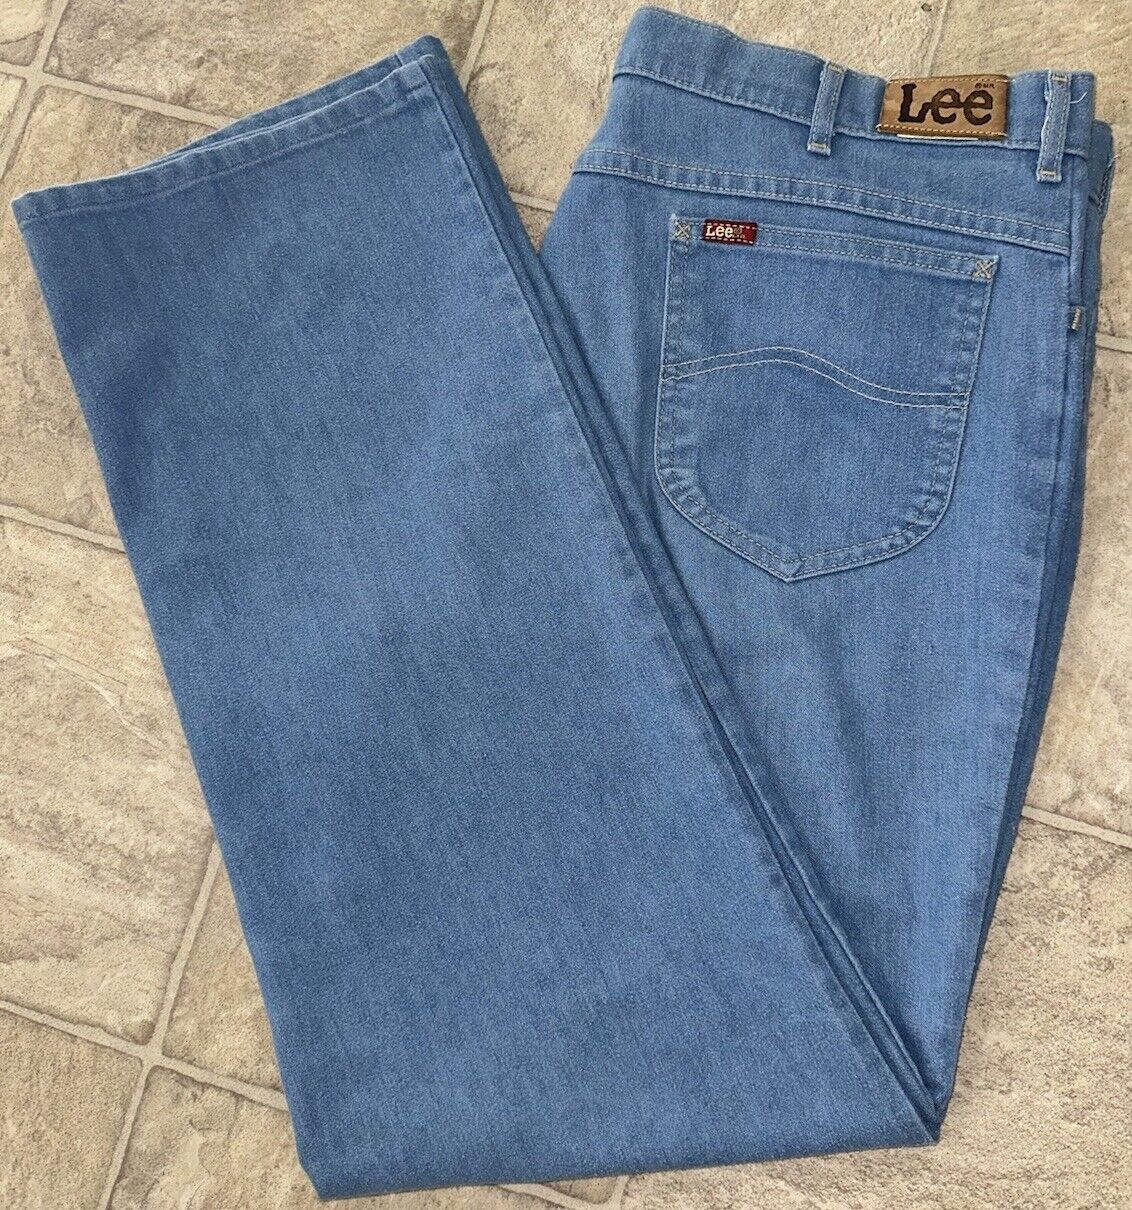 Vintage Lee Rider Jeans Pants Size 40x34 Union Made In USA Light Denim